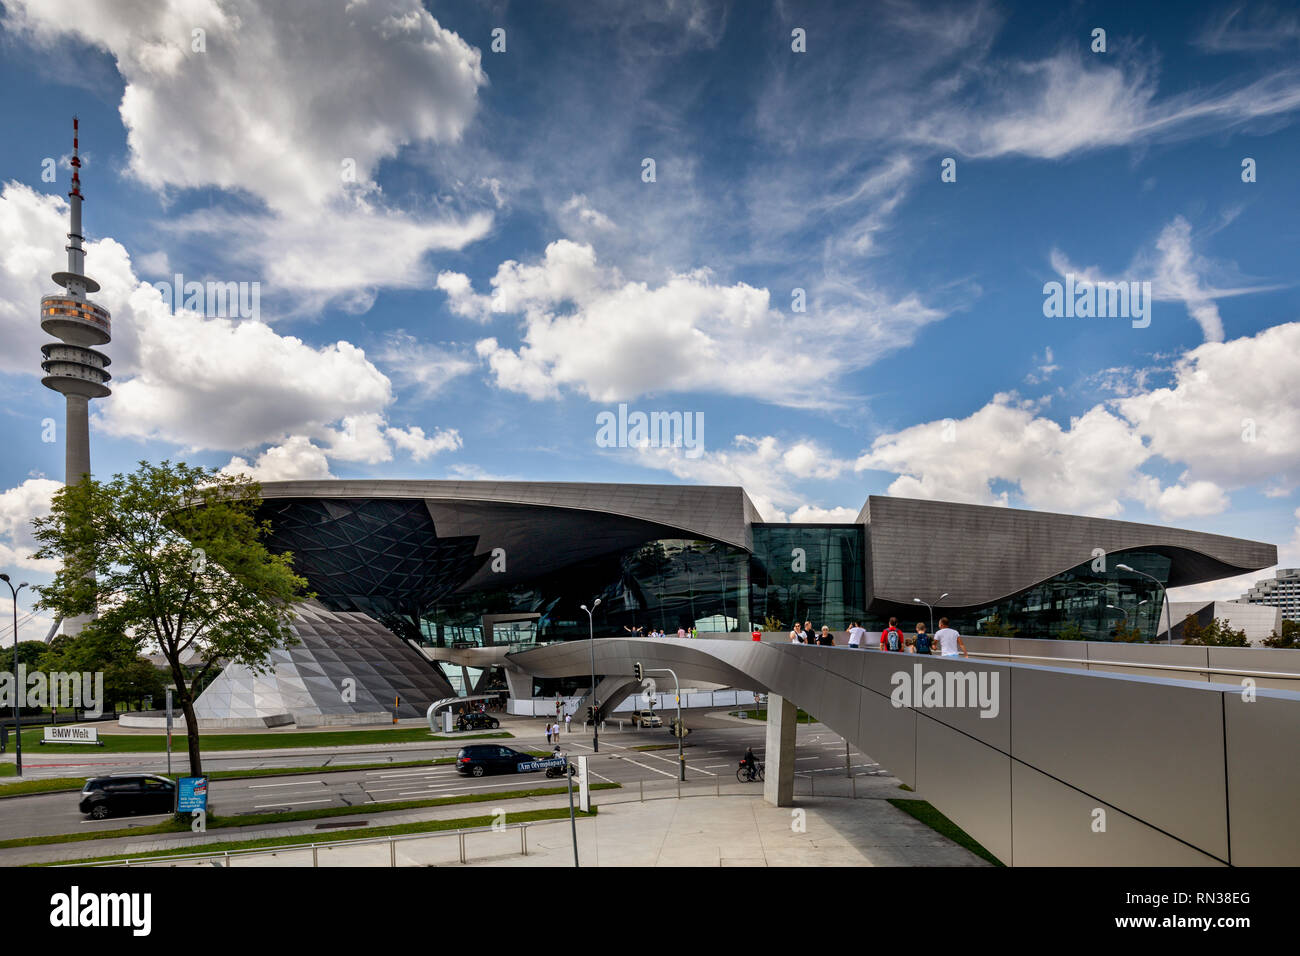 BMW Welt building & BMW headquarters, Munich. BMW Welt is a big showroom where cars of the BMW group (BMW, Mini and Rolls Royce) are on display. Stock Photo